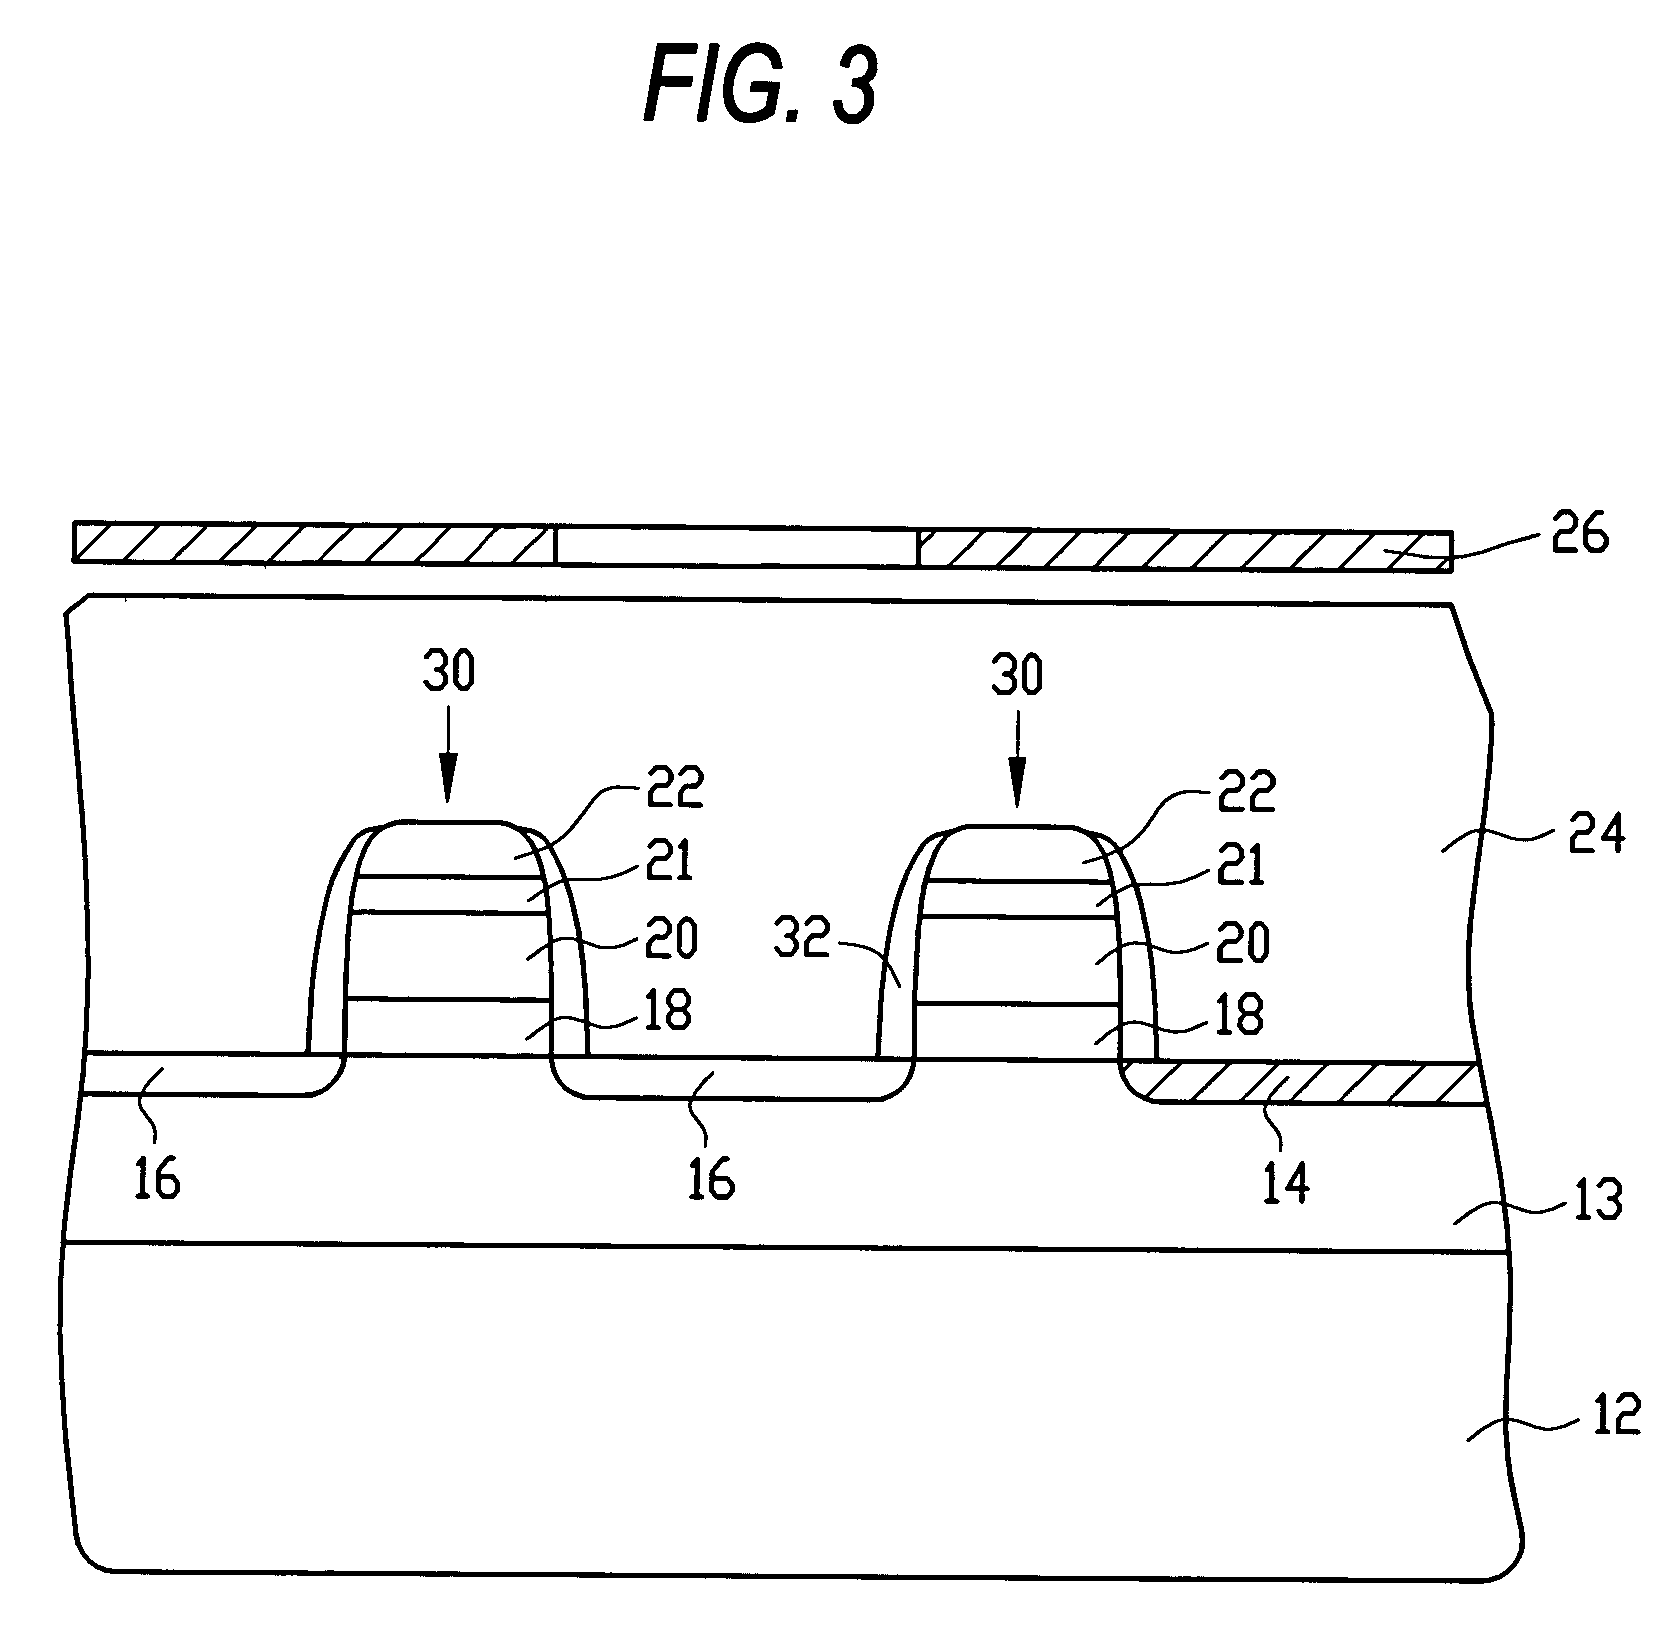 Method of forming integrated circuit structures in silicone ladder polymer